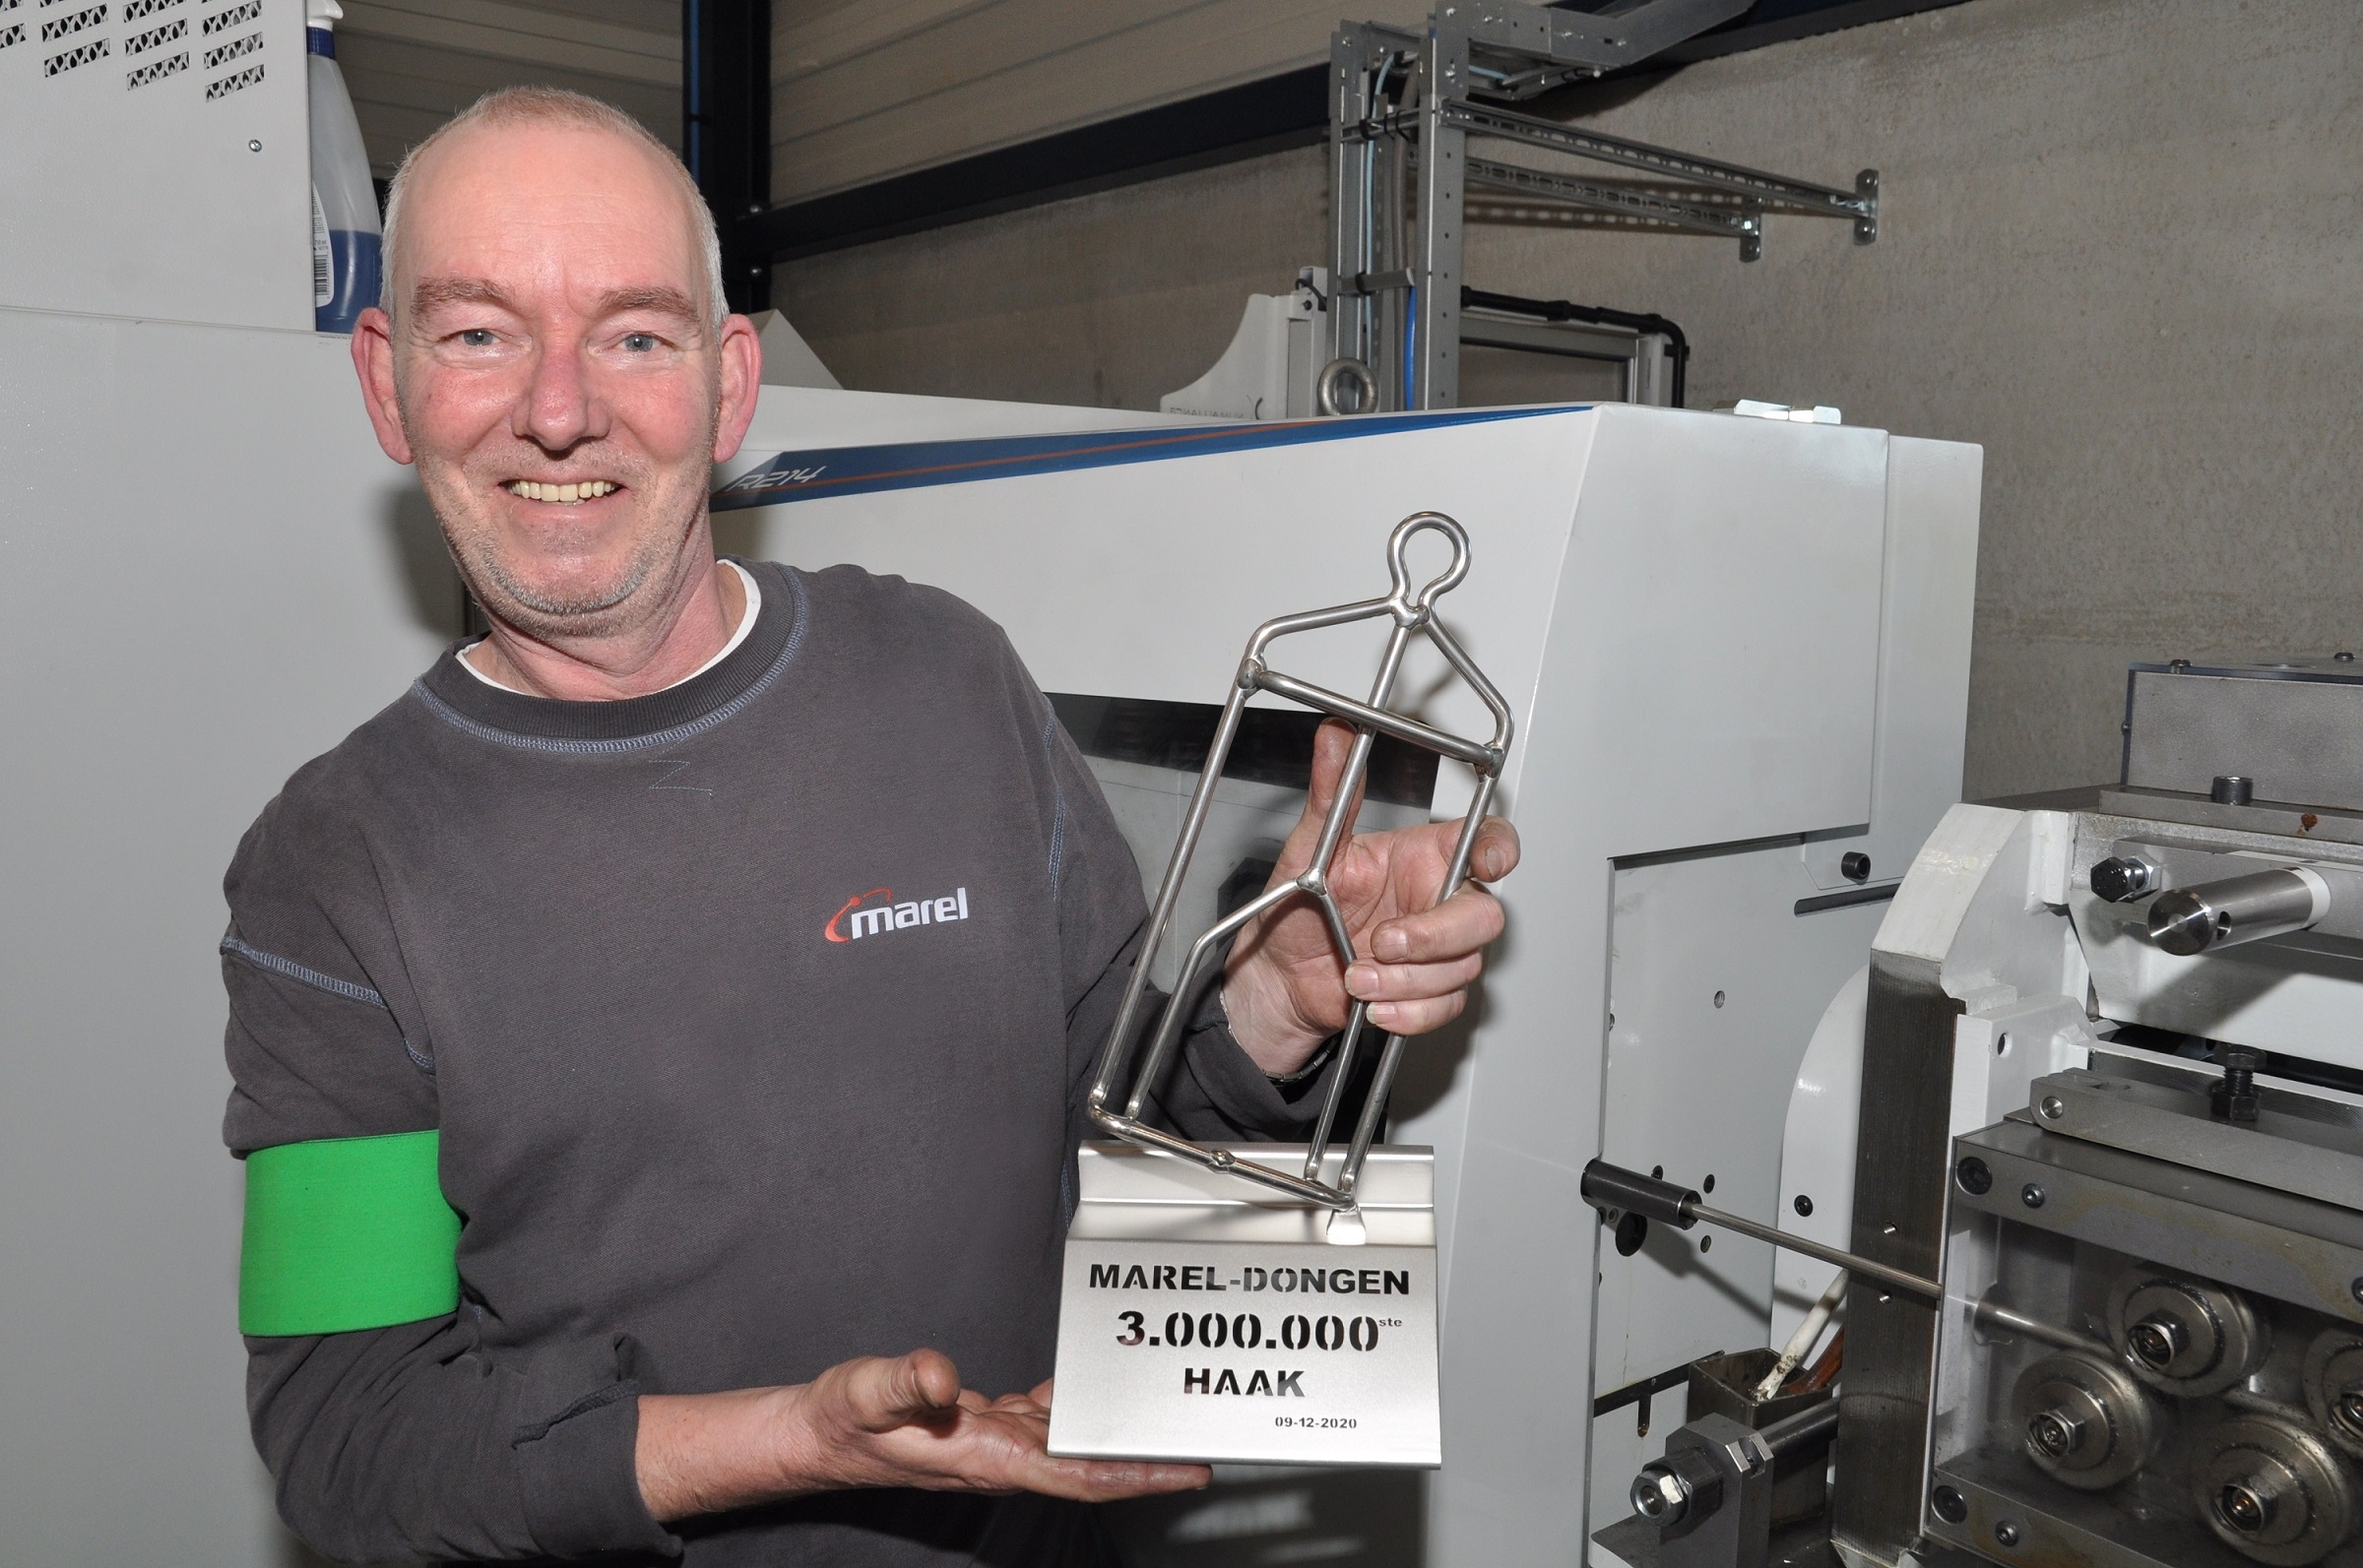 Marel manufactures 3,000,000th poultry shackle